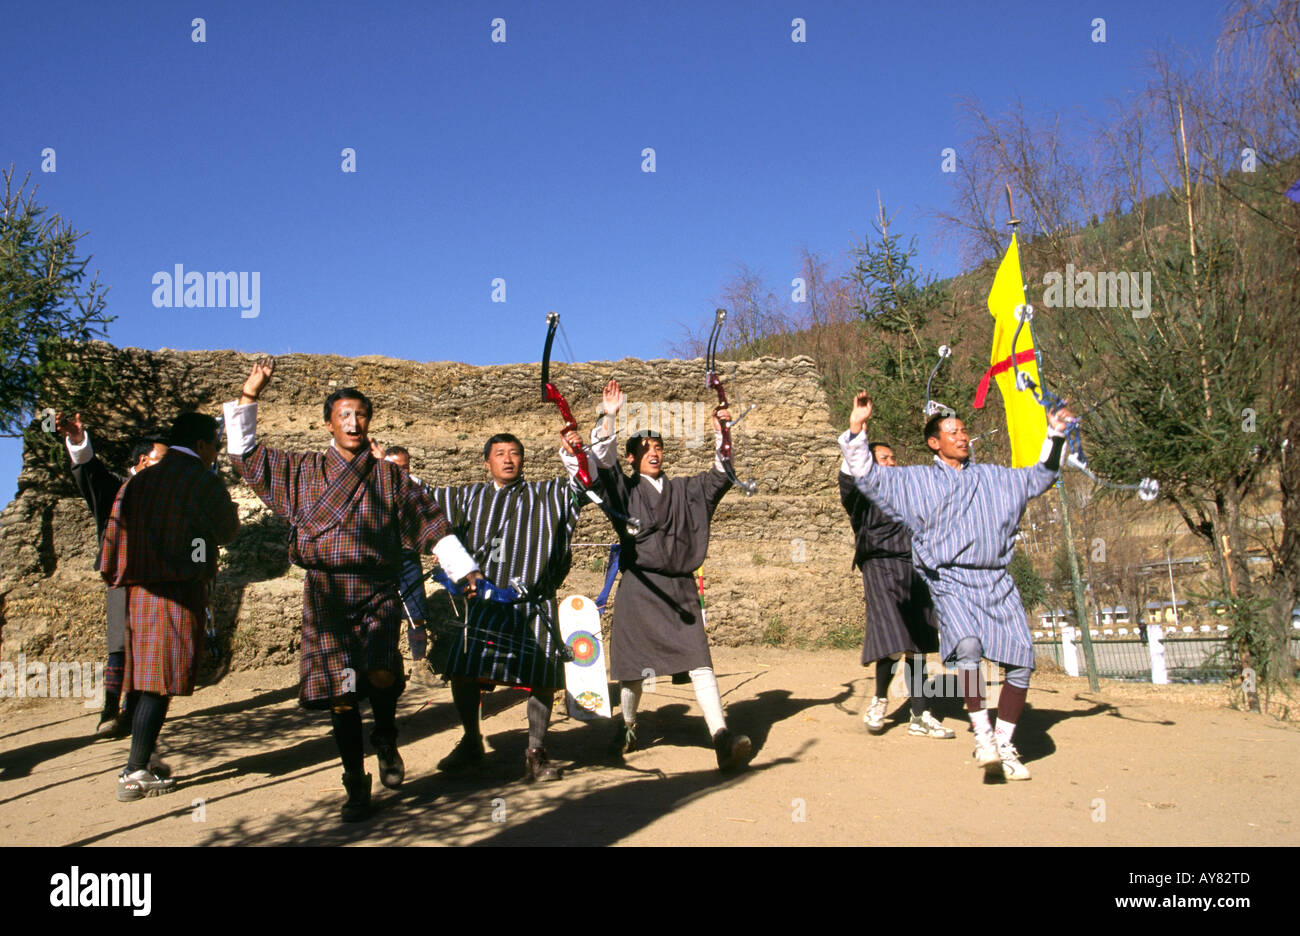 Bhutan Thimpu sport Archers celebrating after successful shot with traditional dance Stock Photo